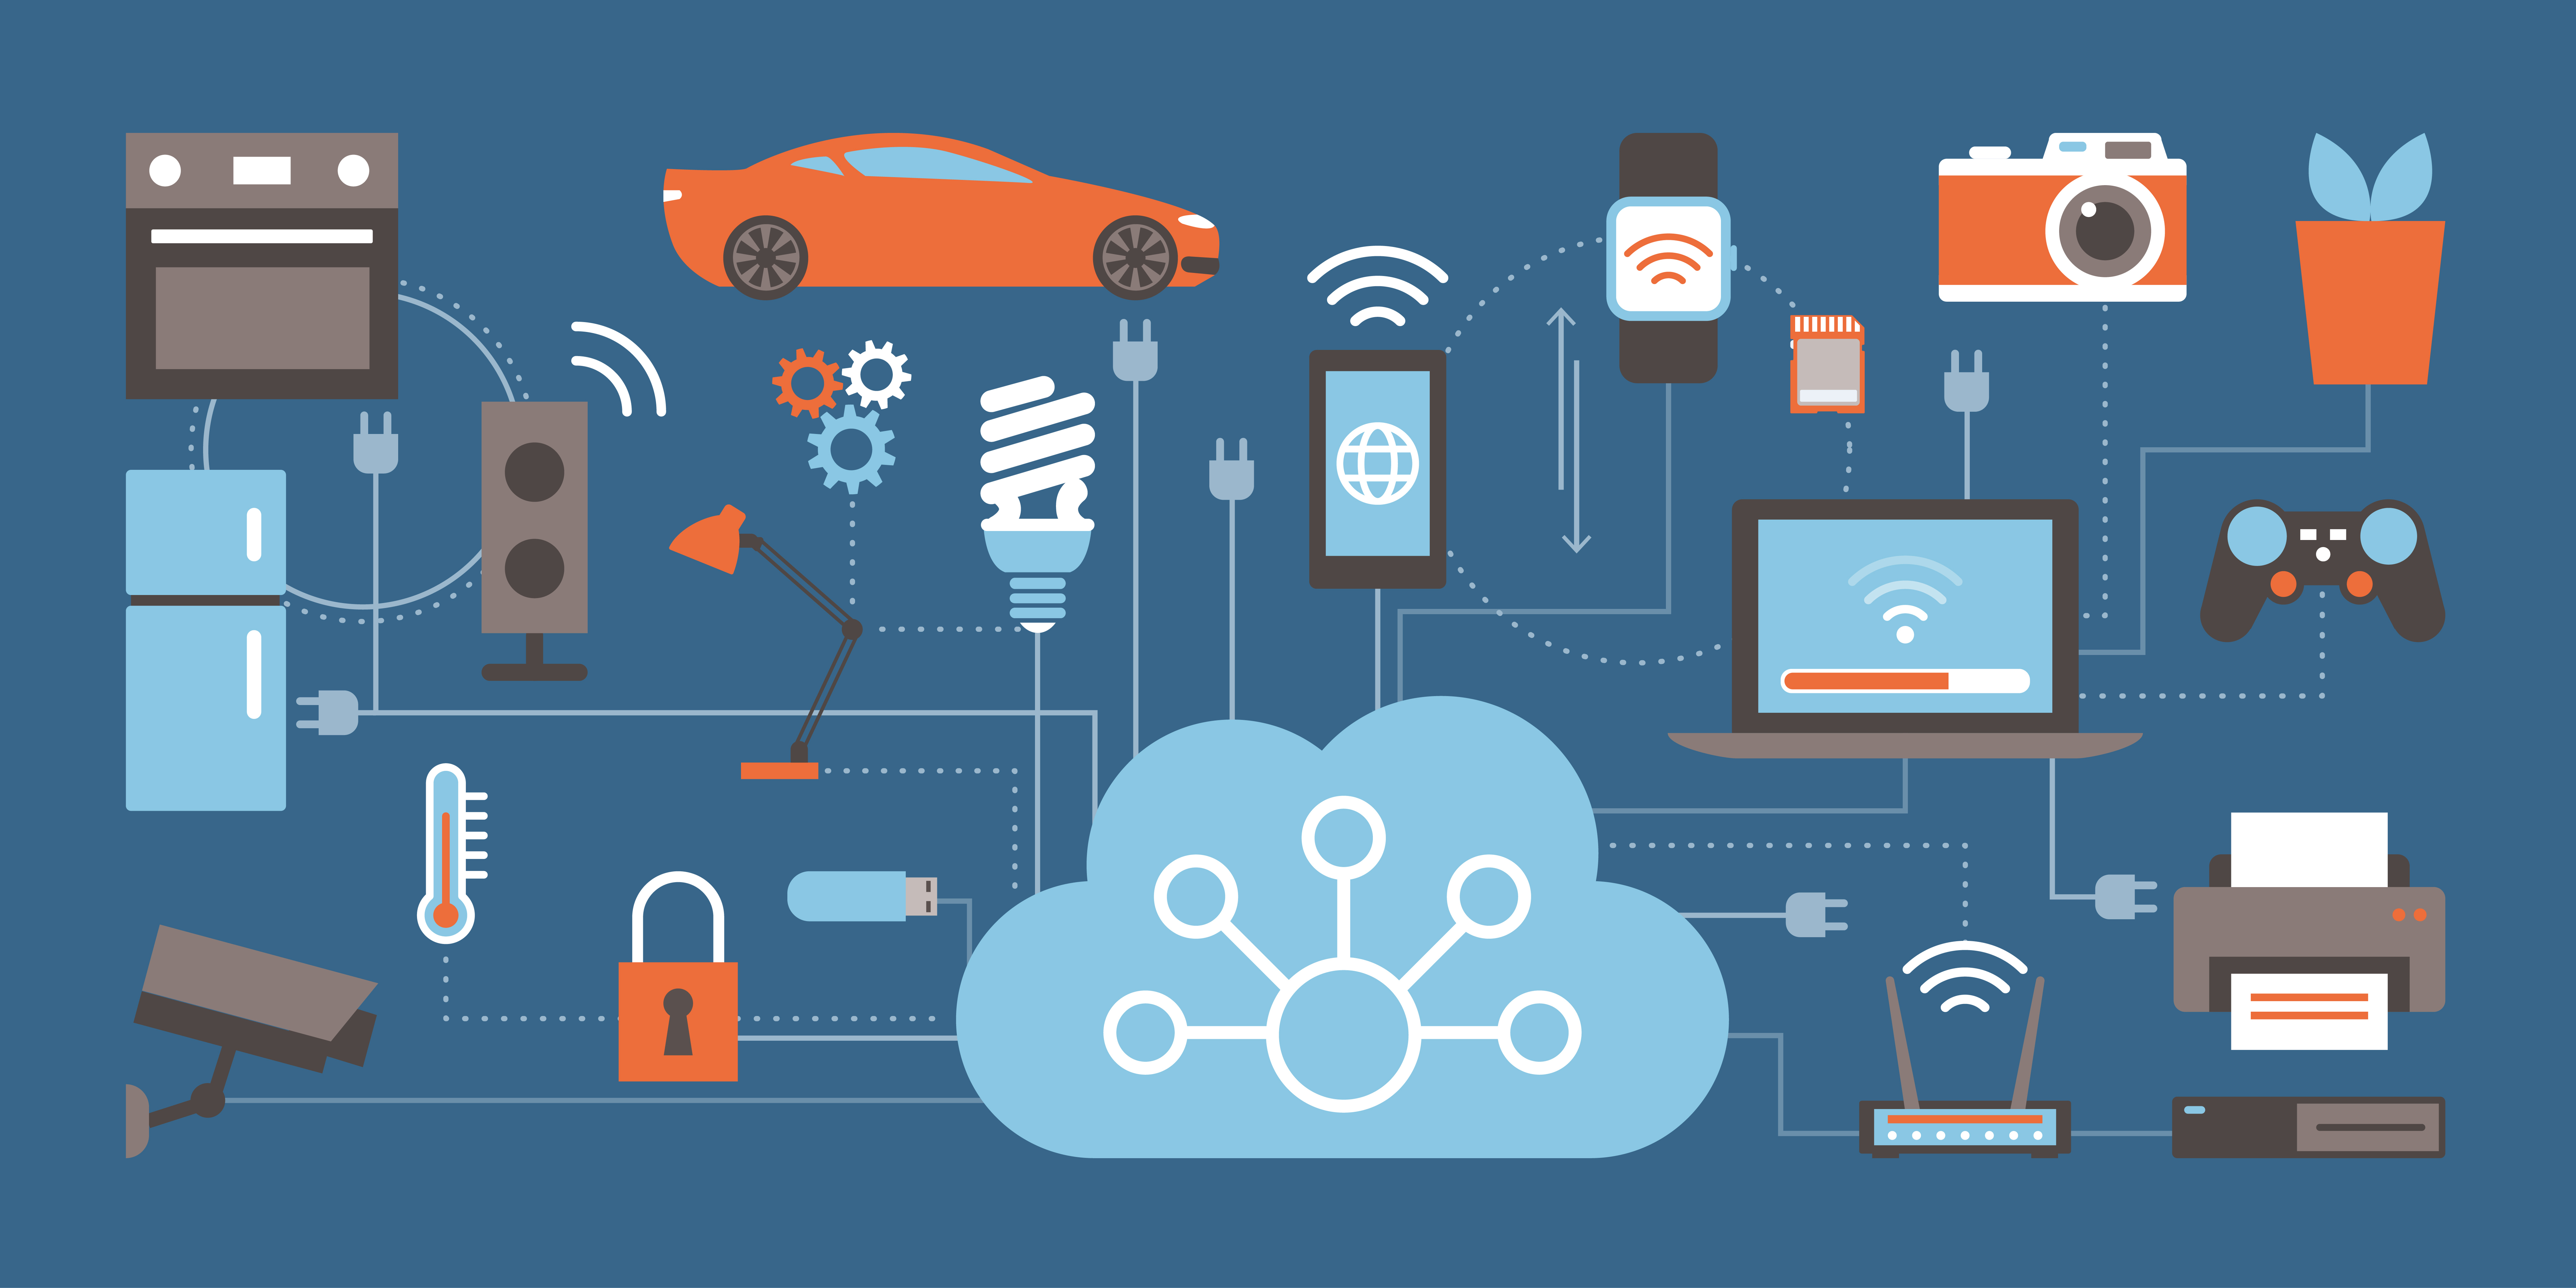 Internet Of Things And Security: Threats And Solutions